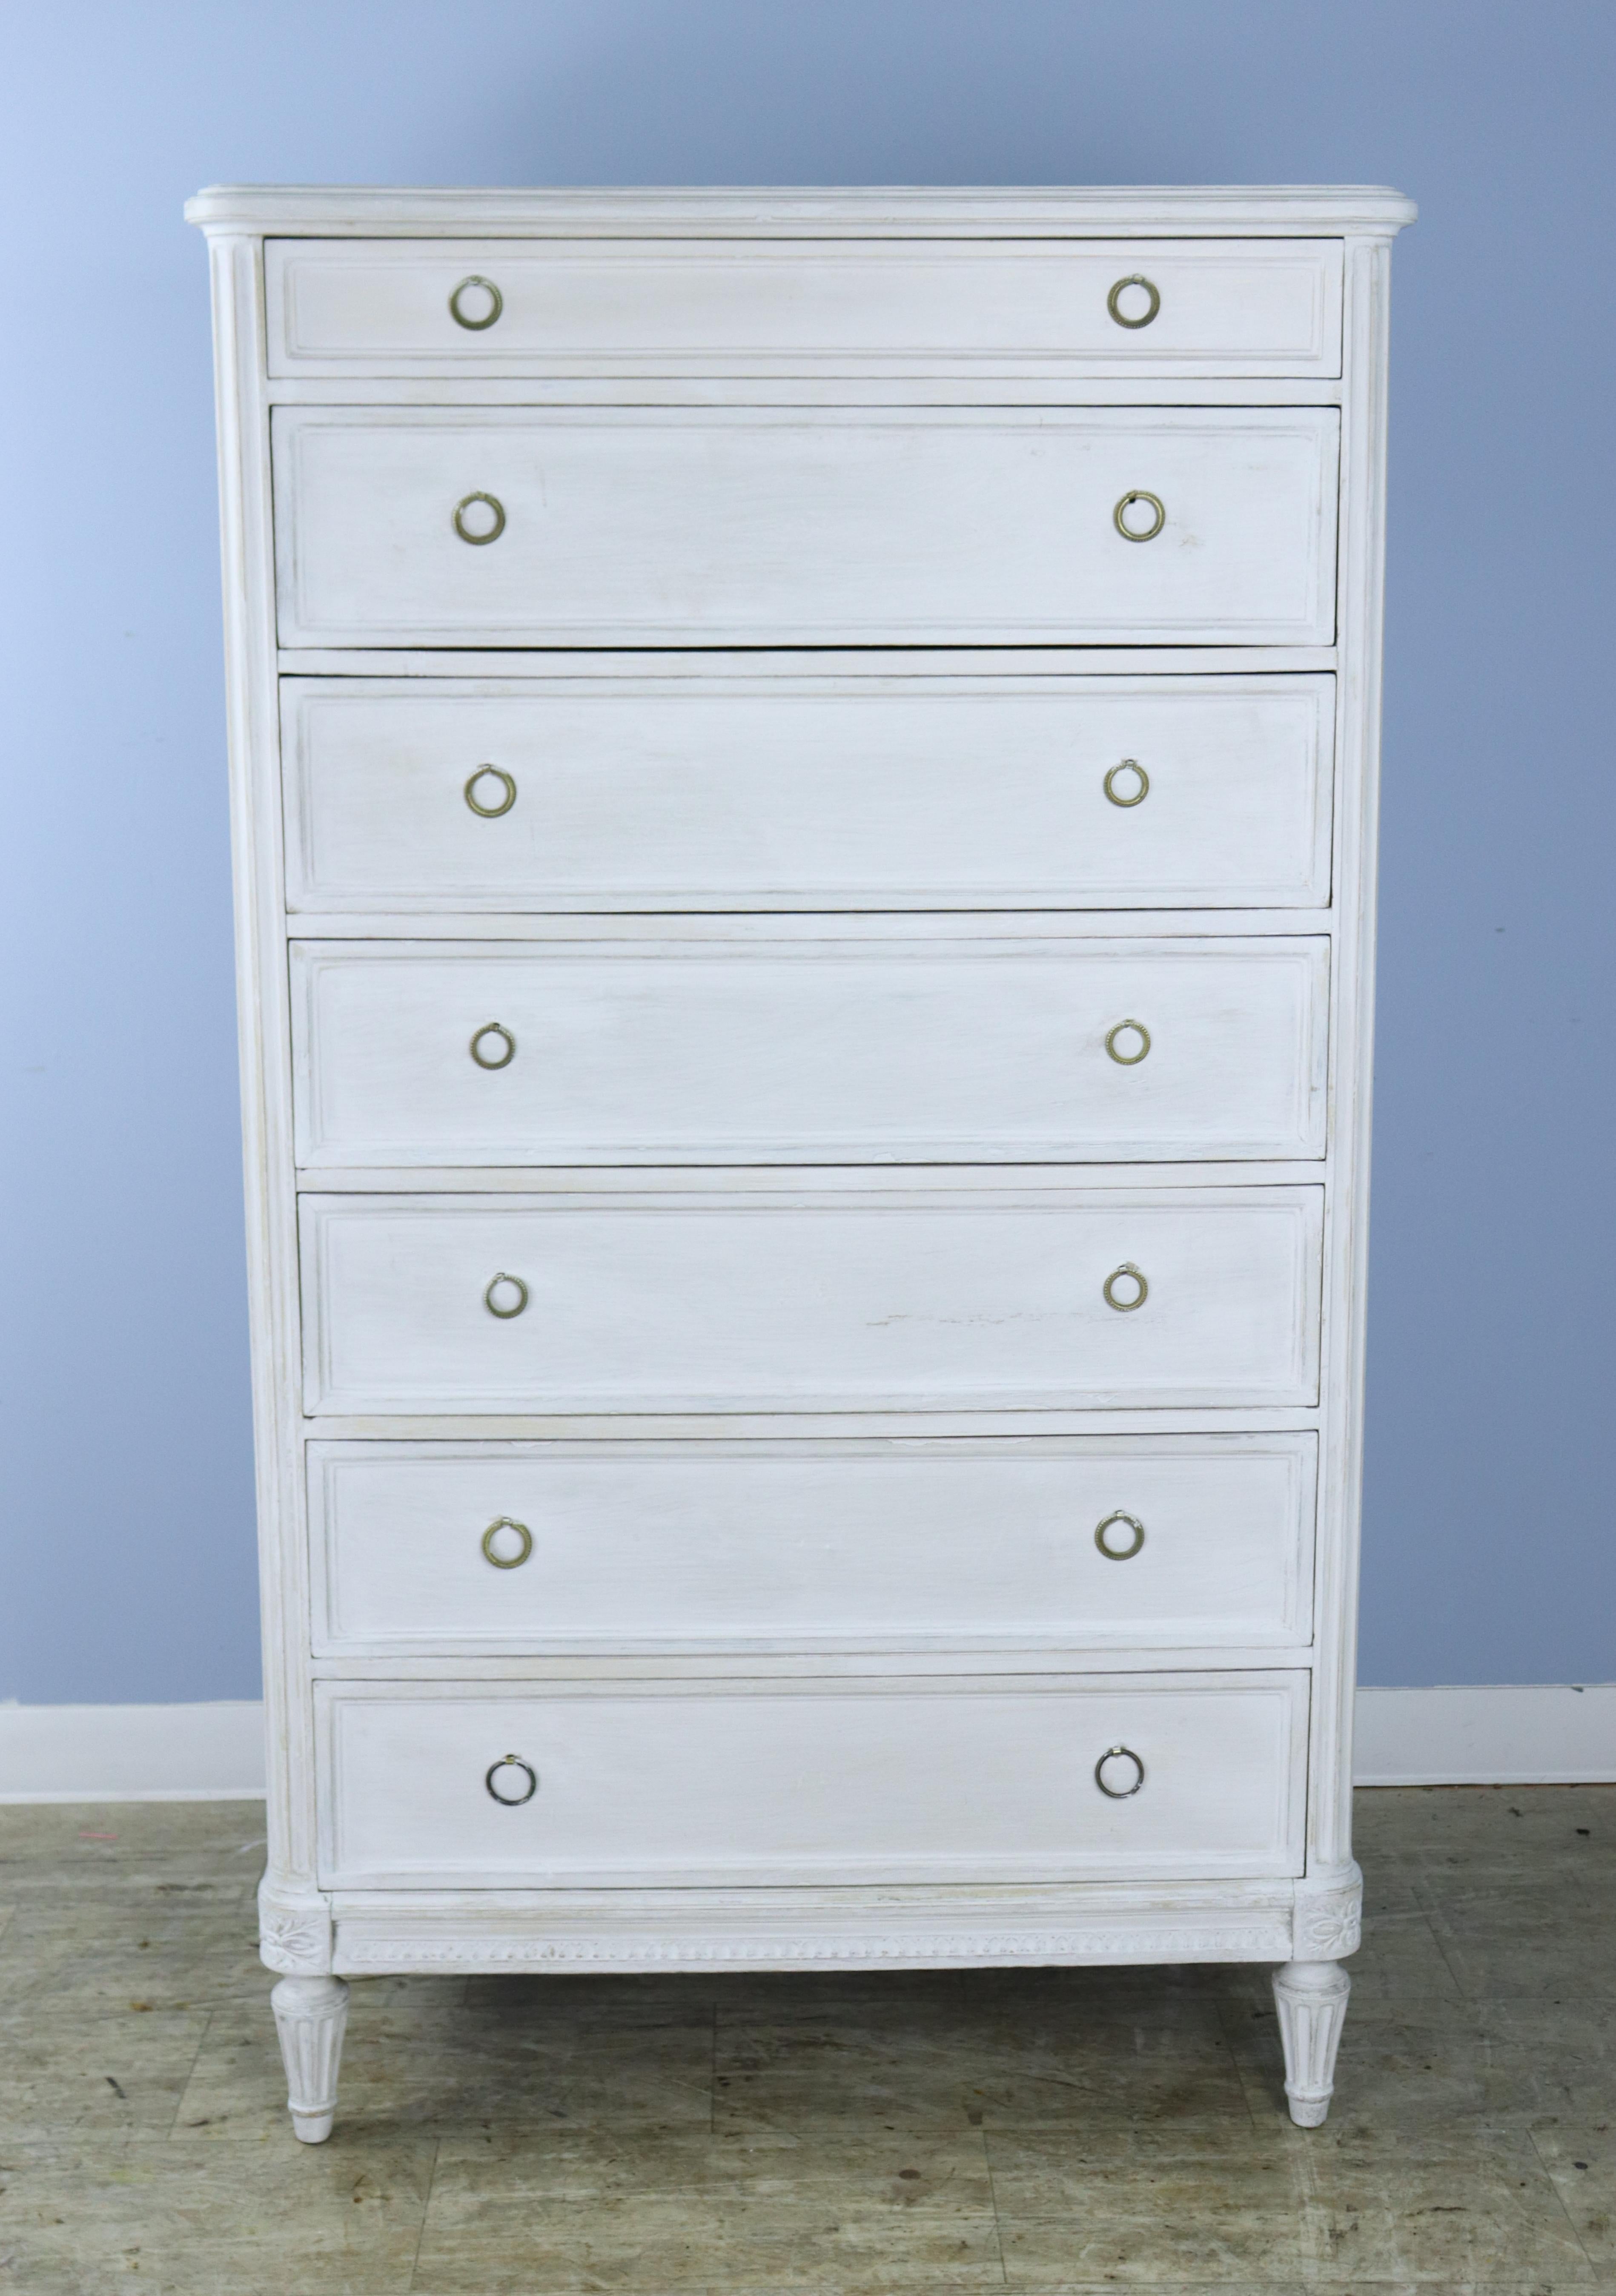 A tall seven drawer dresser, one for each day of the week.  Original bronze handles, with two replaced on the bottom drawer. Paint has been refreshed.